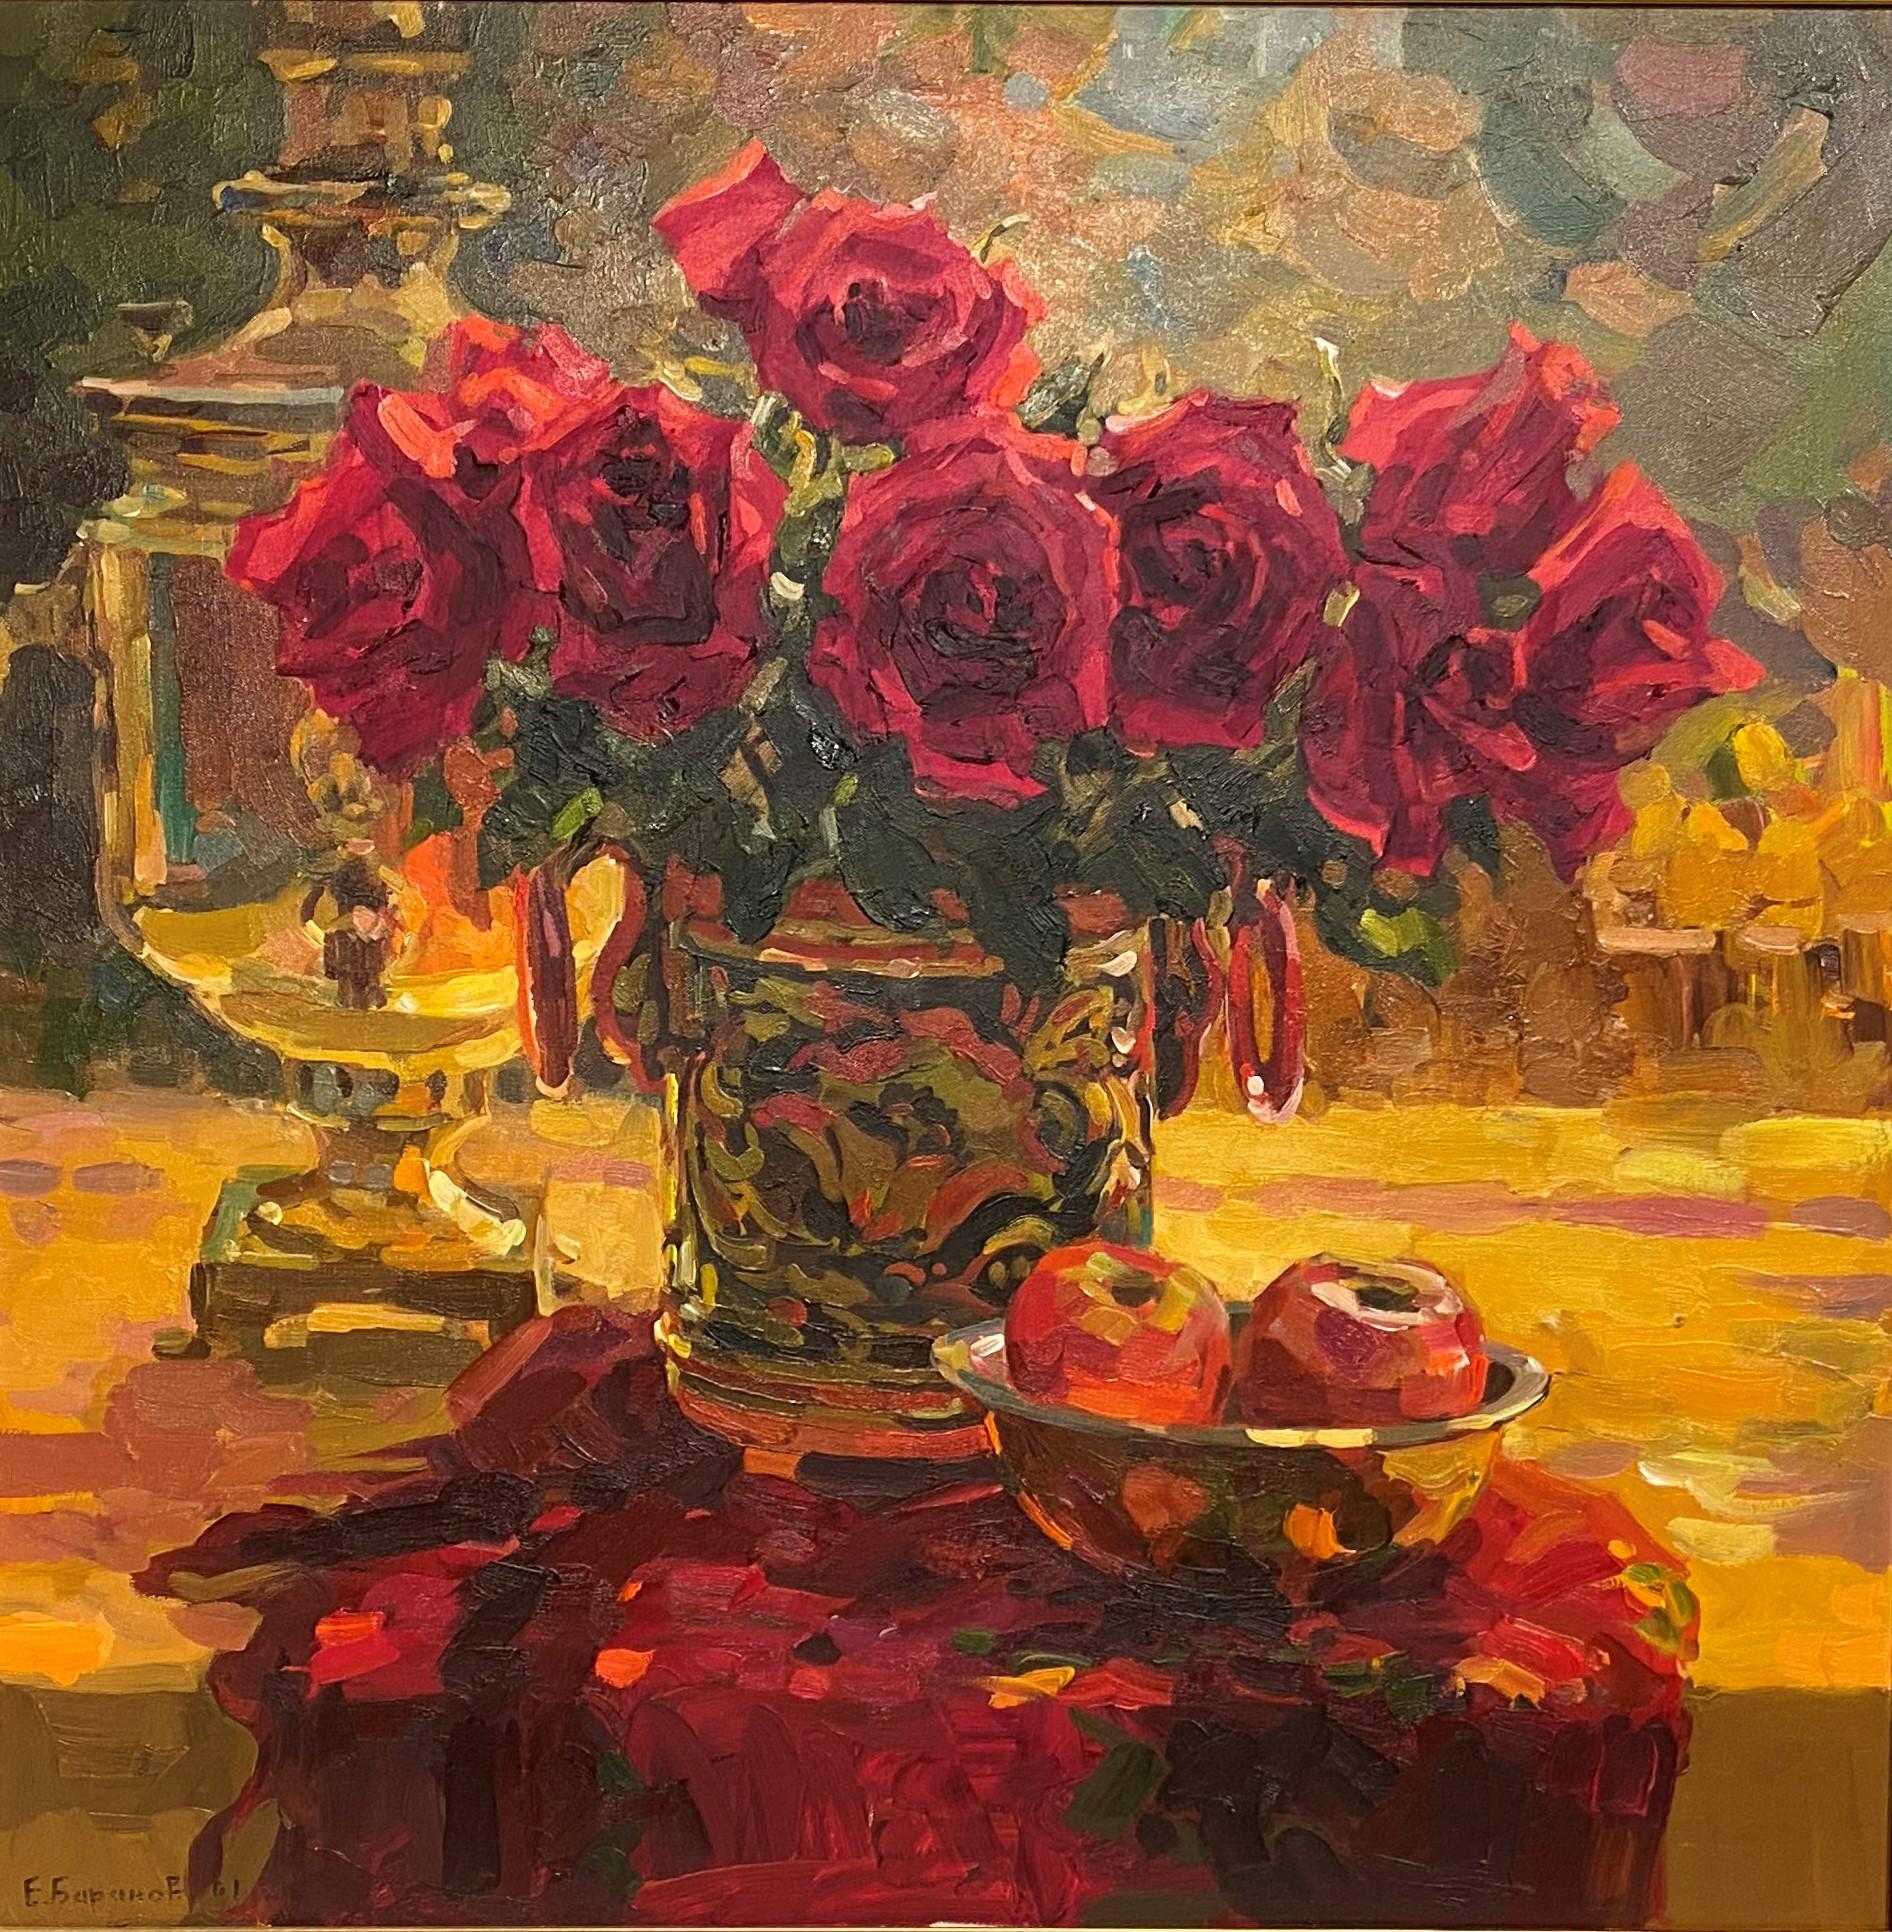 Russian Roses - Painting by Evgeny Baranov